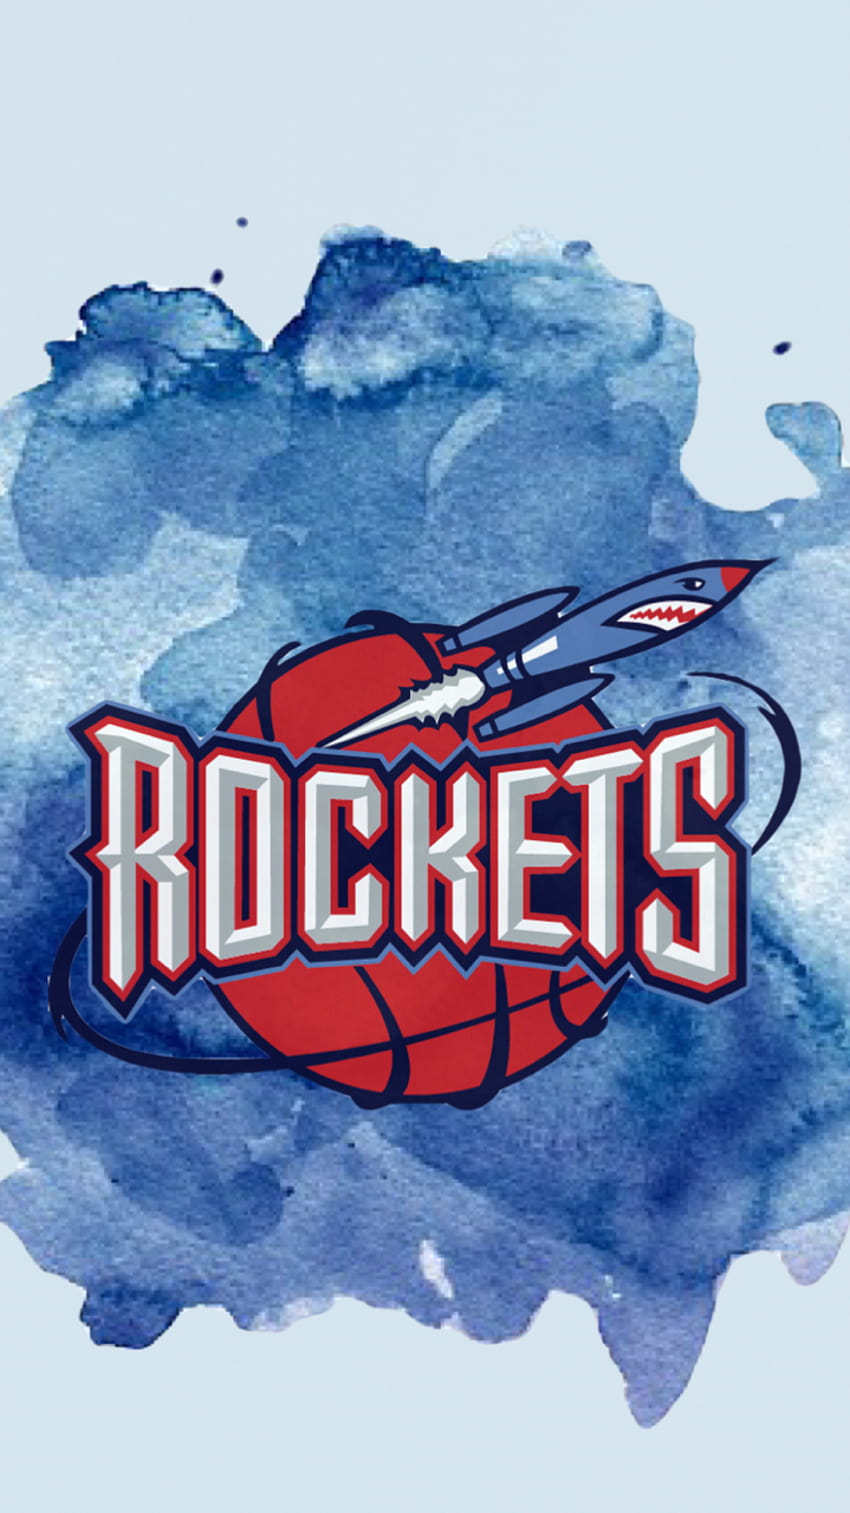  Wallpaper of Houston Basketball Club APK for Android Download